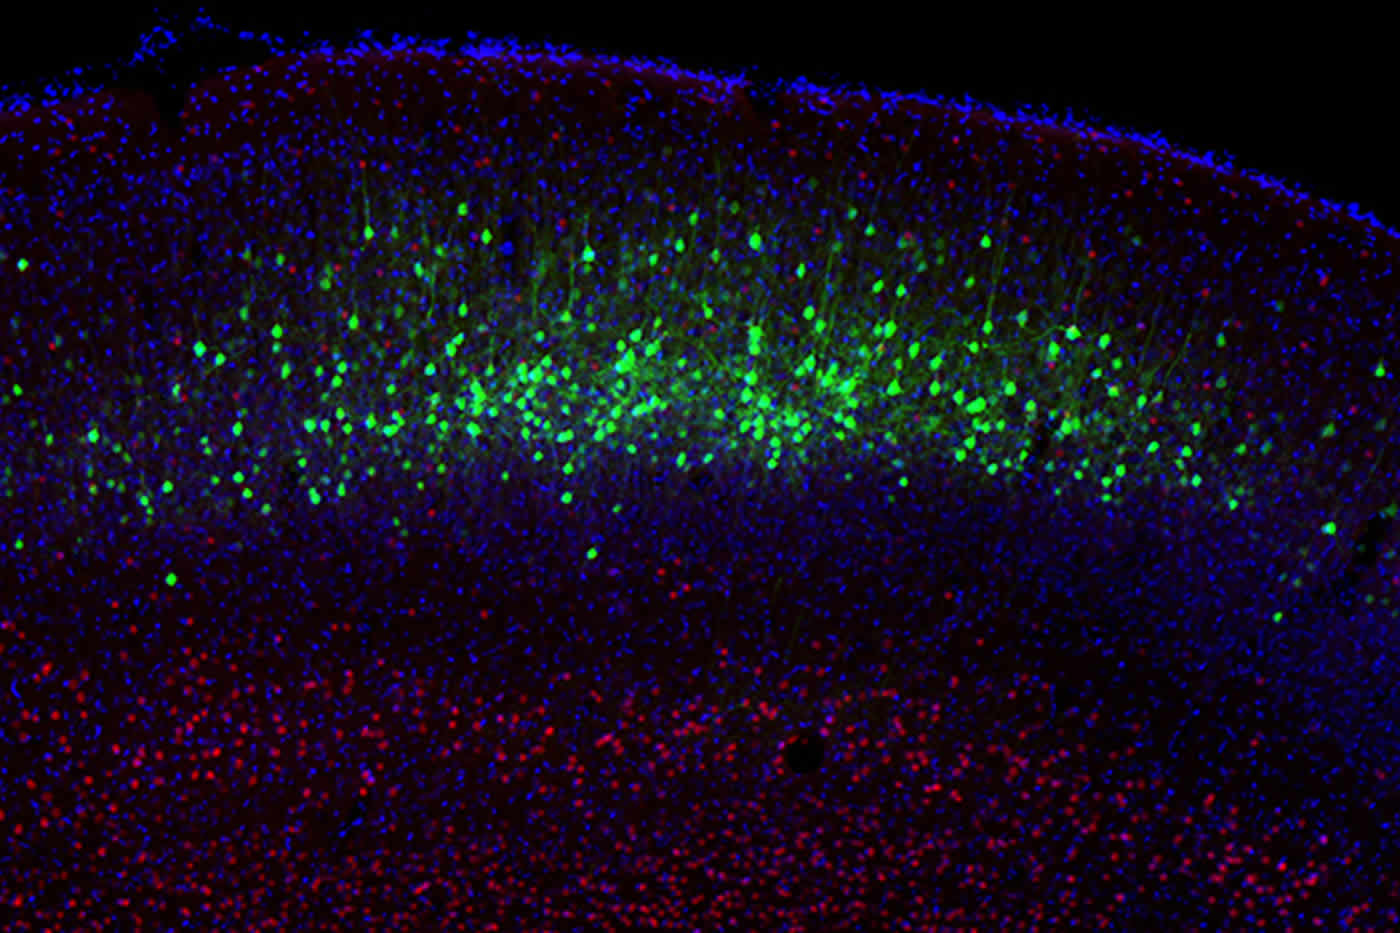 Image shows neurons in the cerebral cortex.